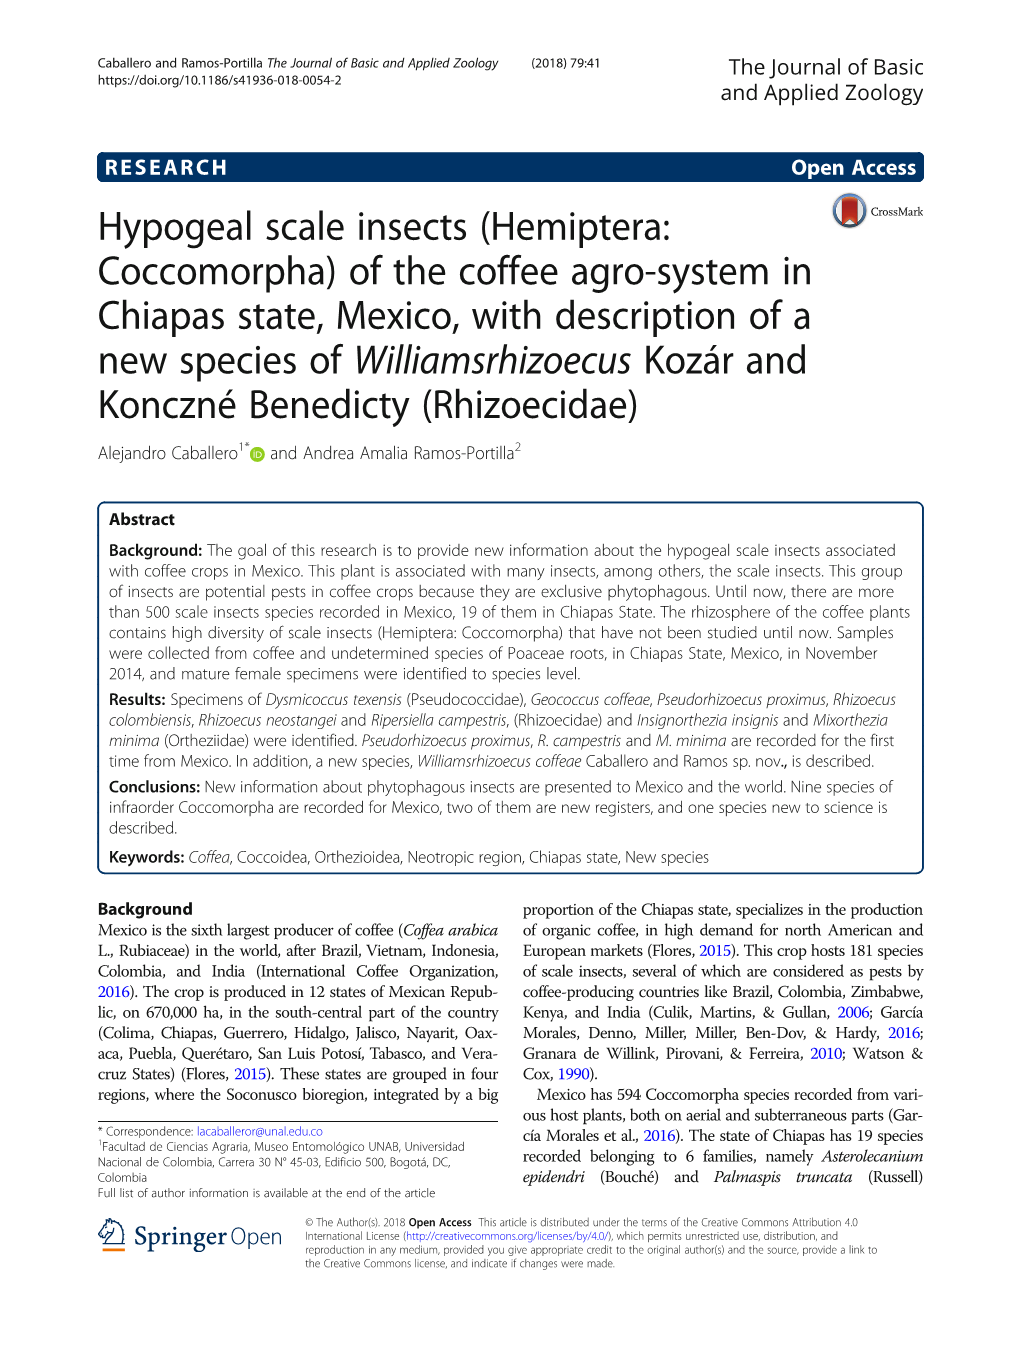 Hypogeal Scale Insects